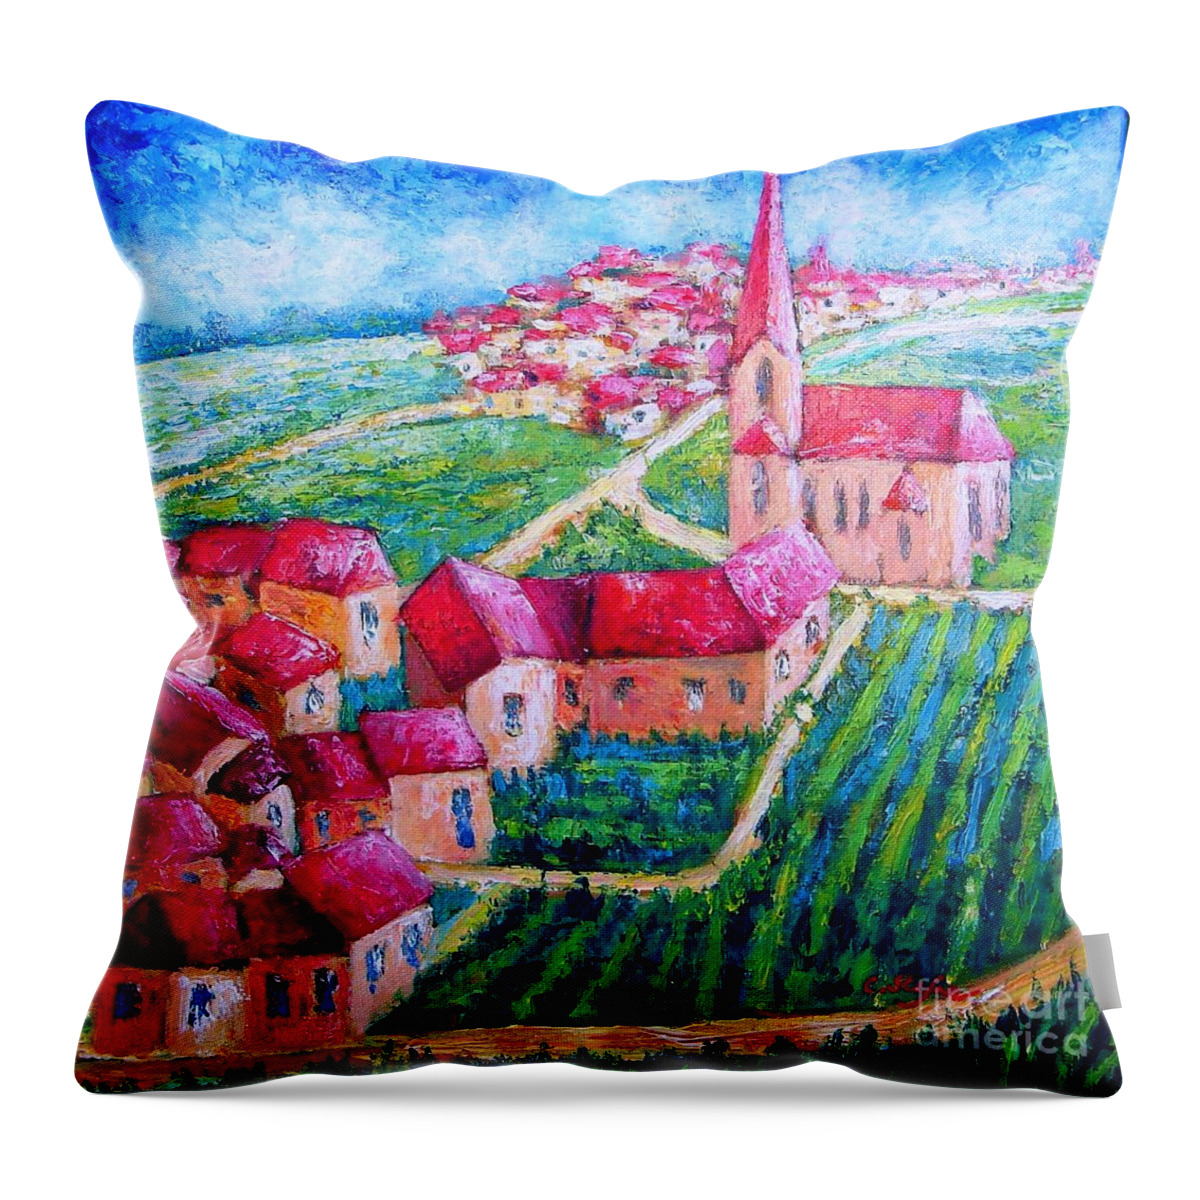 Village Throw Pillow featuring the painting The Village by Cristina Stefan